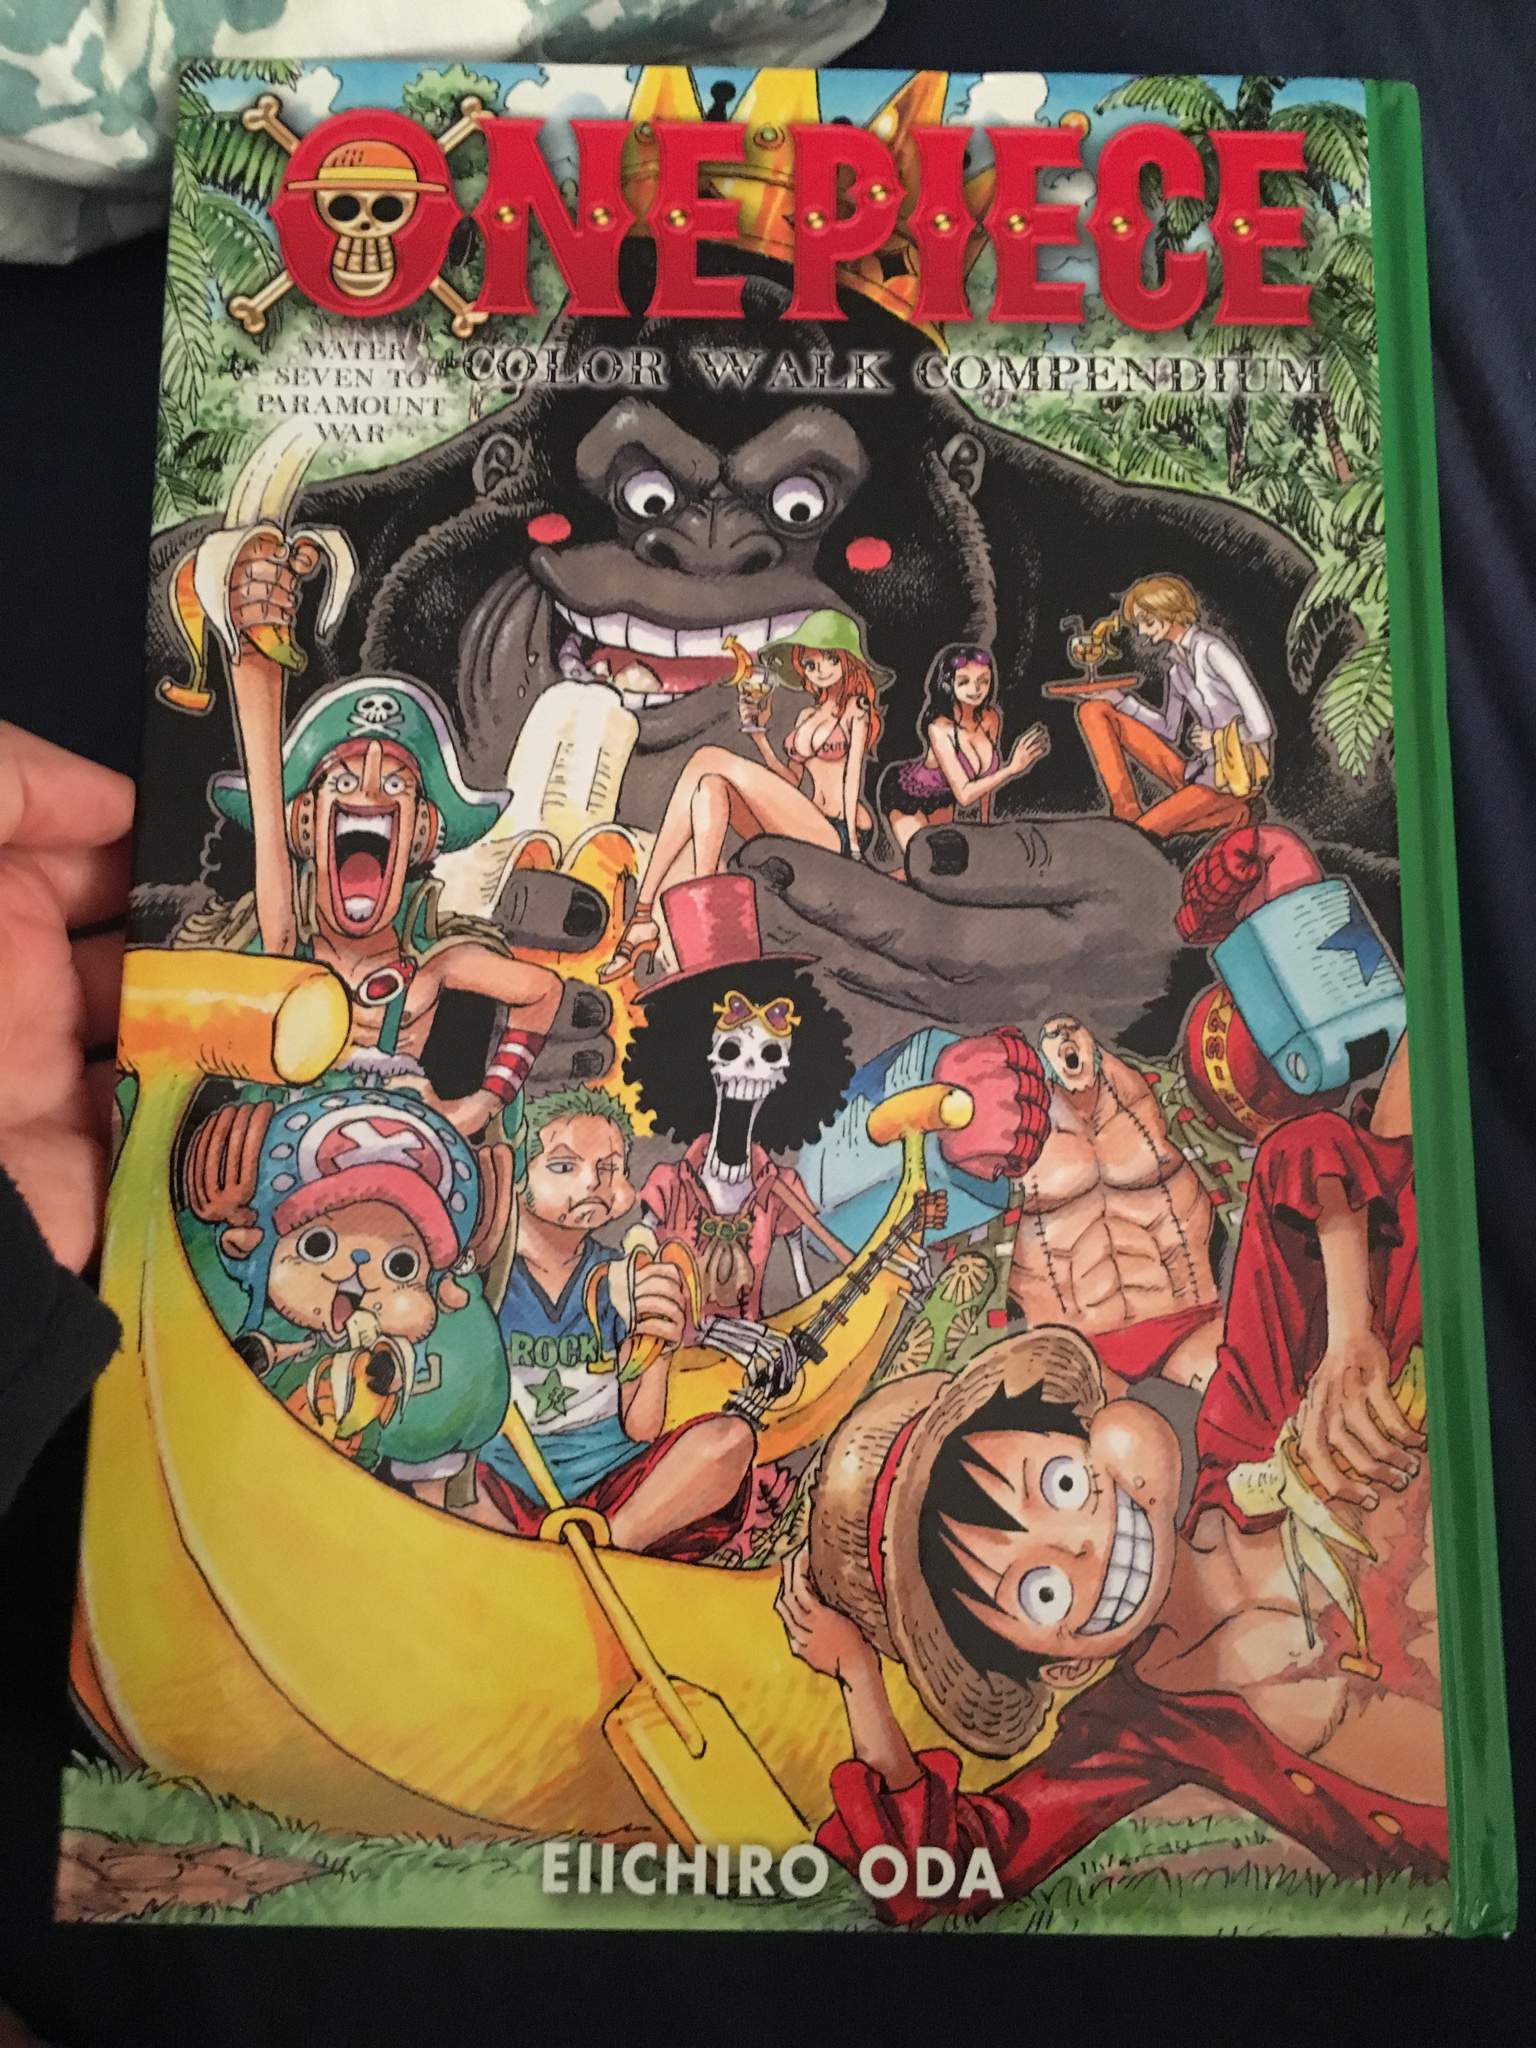 Just Received My Color Walk Compendium It S Full Of Many Pages Of Such Amazing Art And Interviews I Love It One Piece Amino